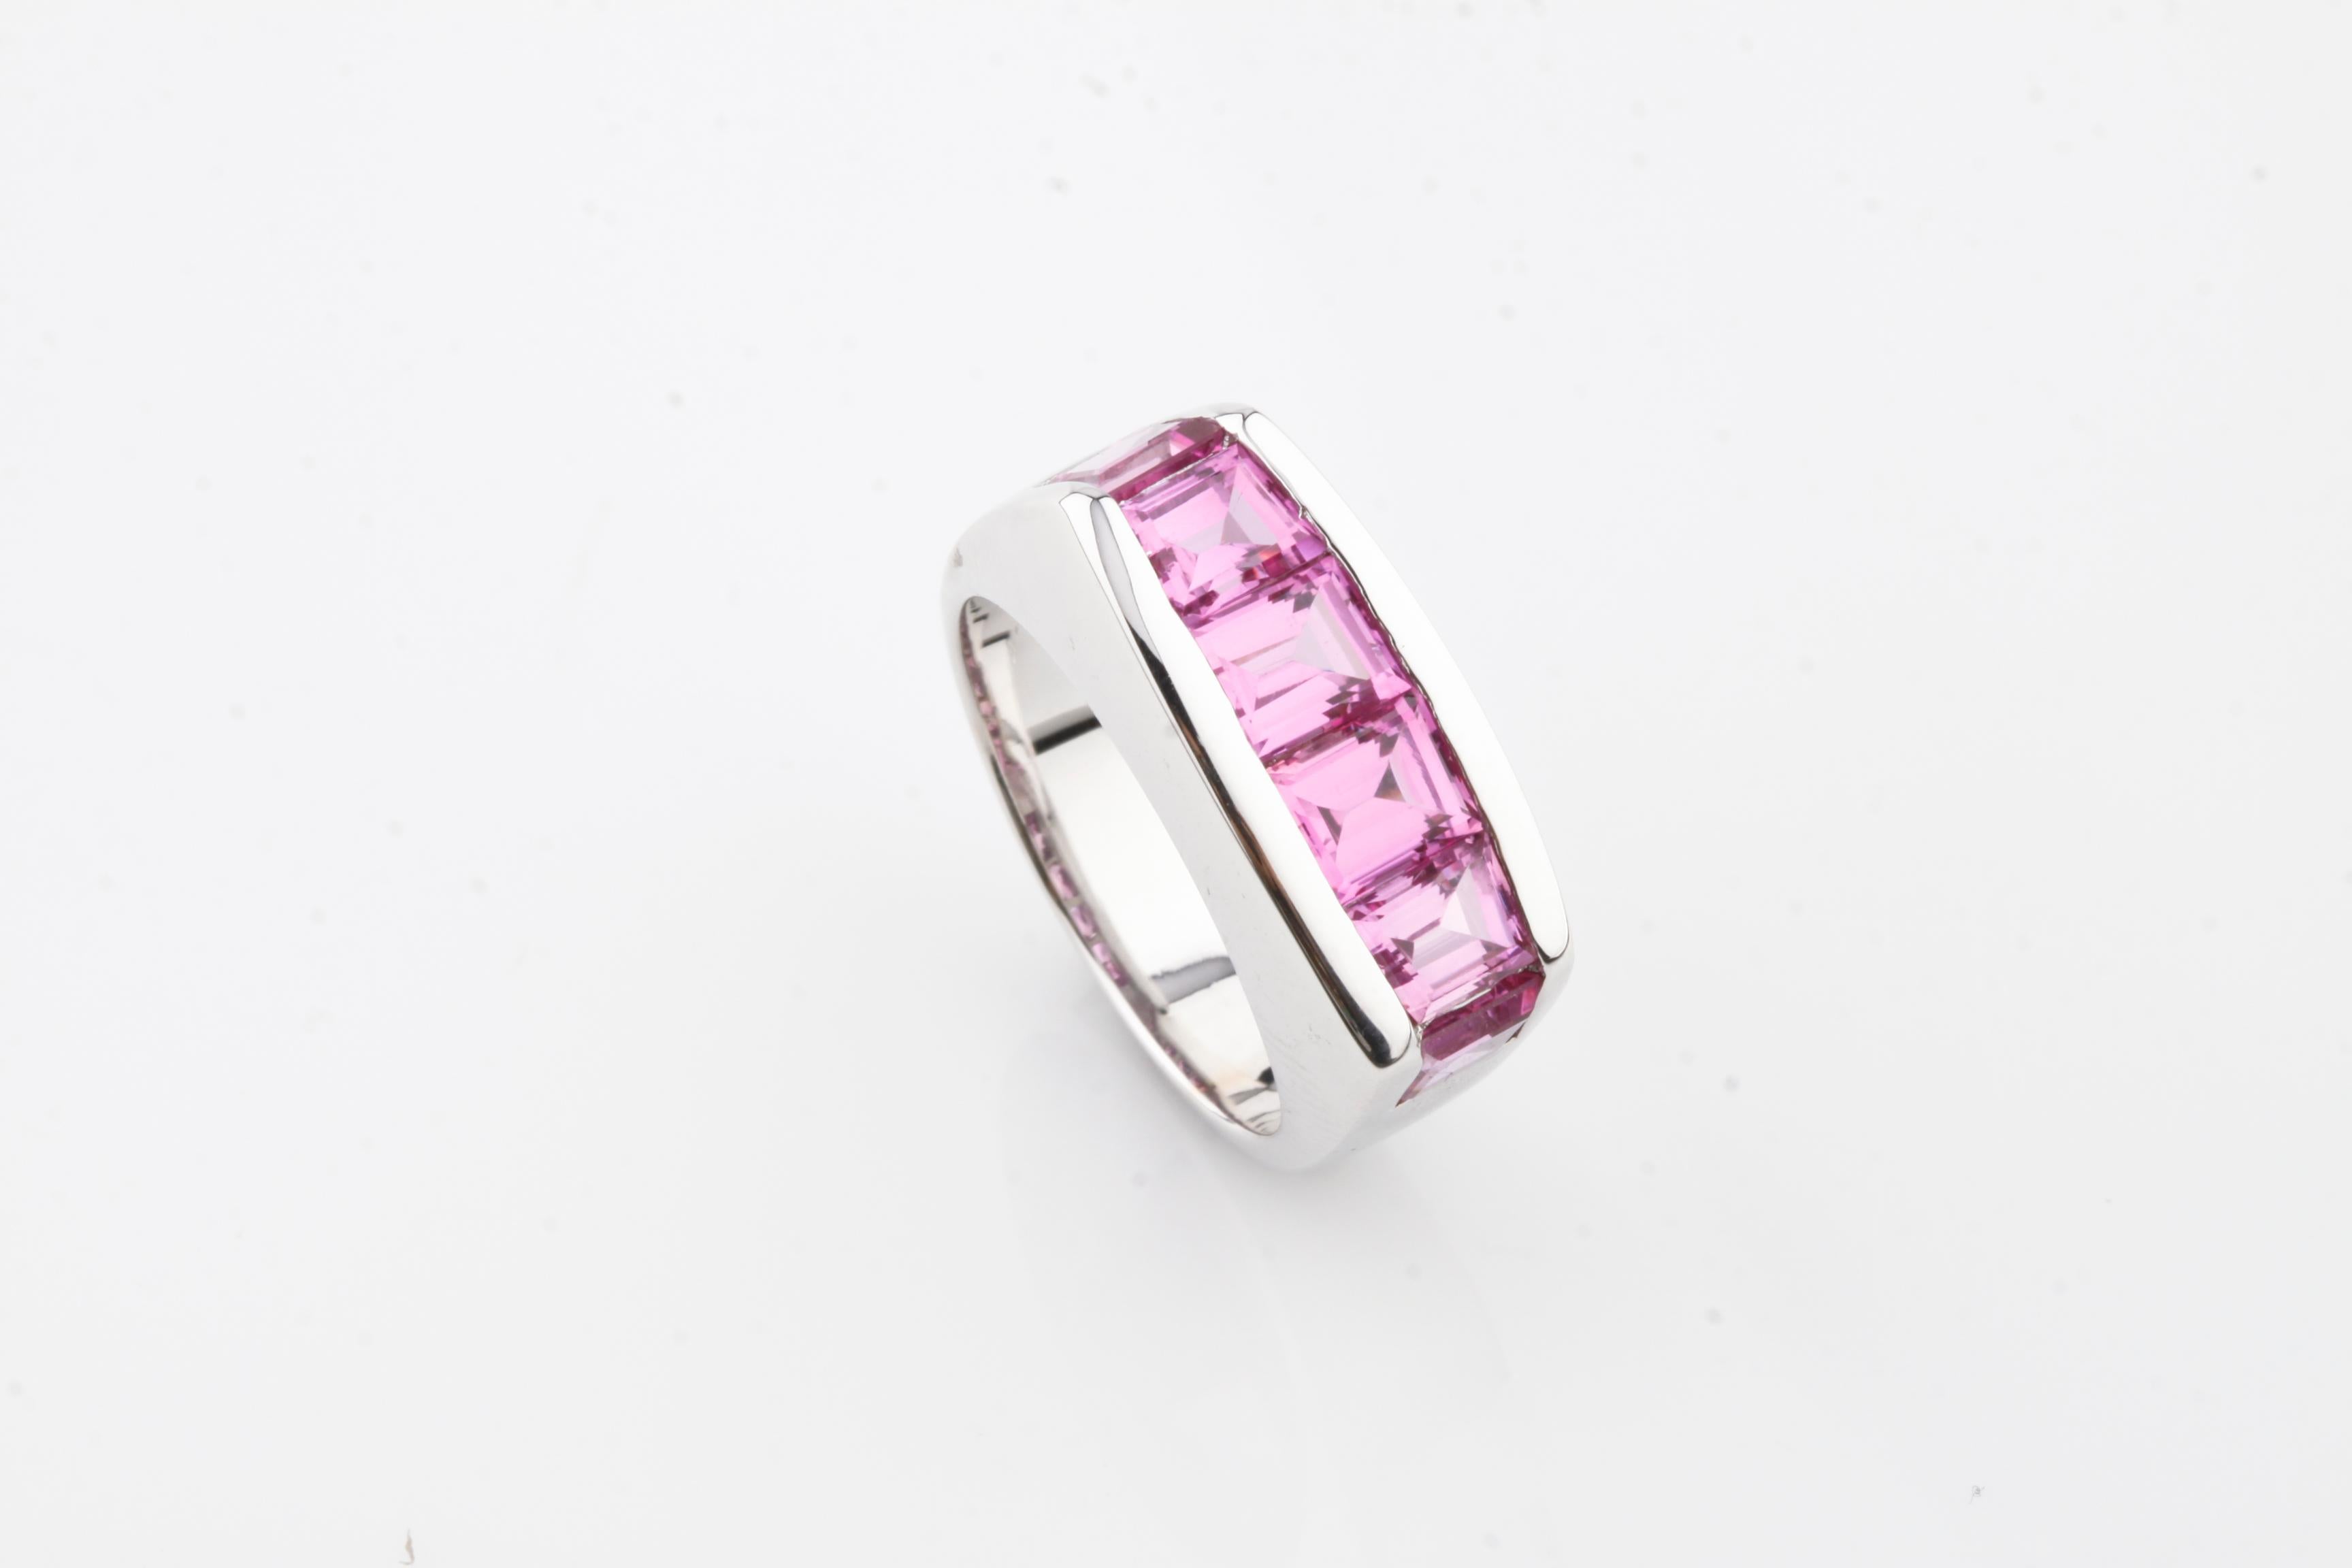 One electronically tested 14k white gold ladies laboratory created pink sapphire ring with a bright finish. Condition is good, Identified with the markings of 